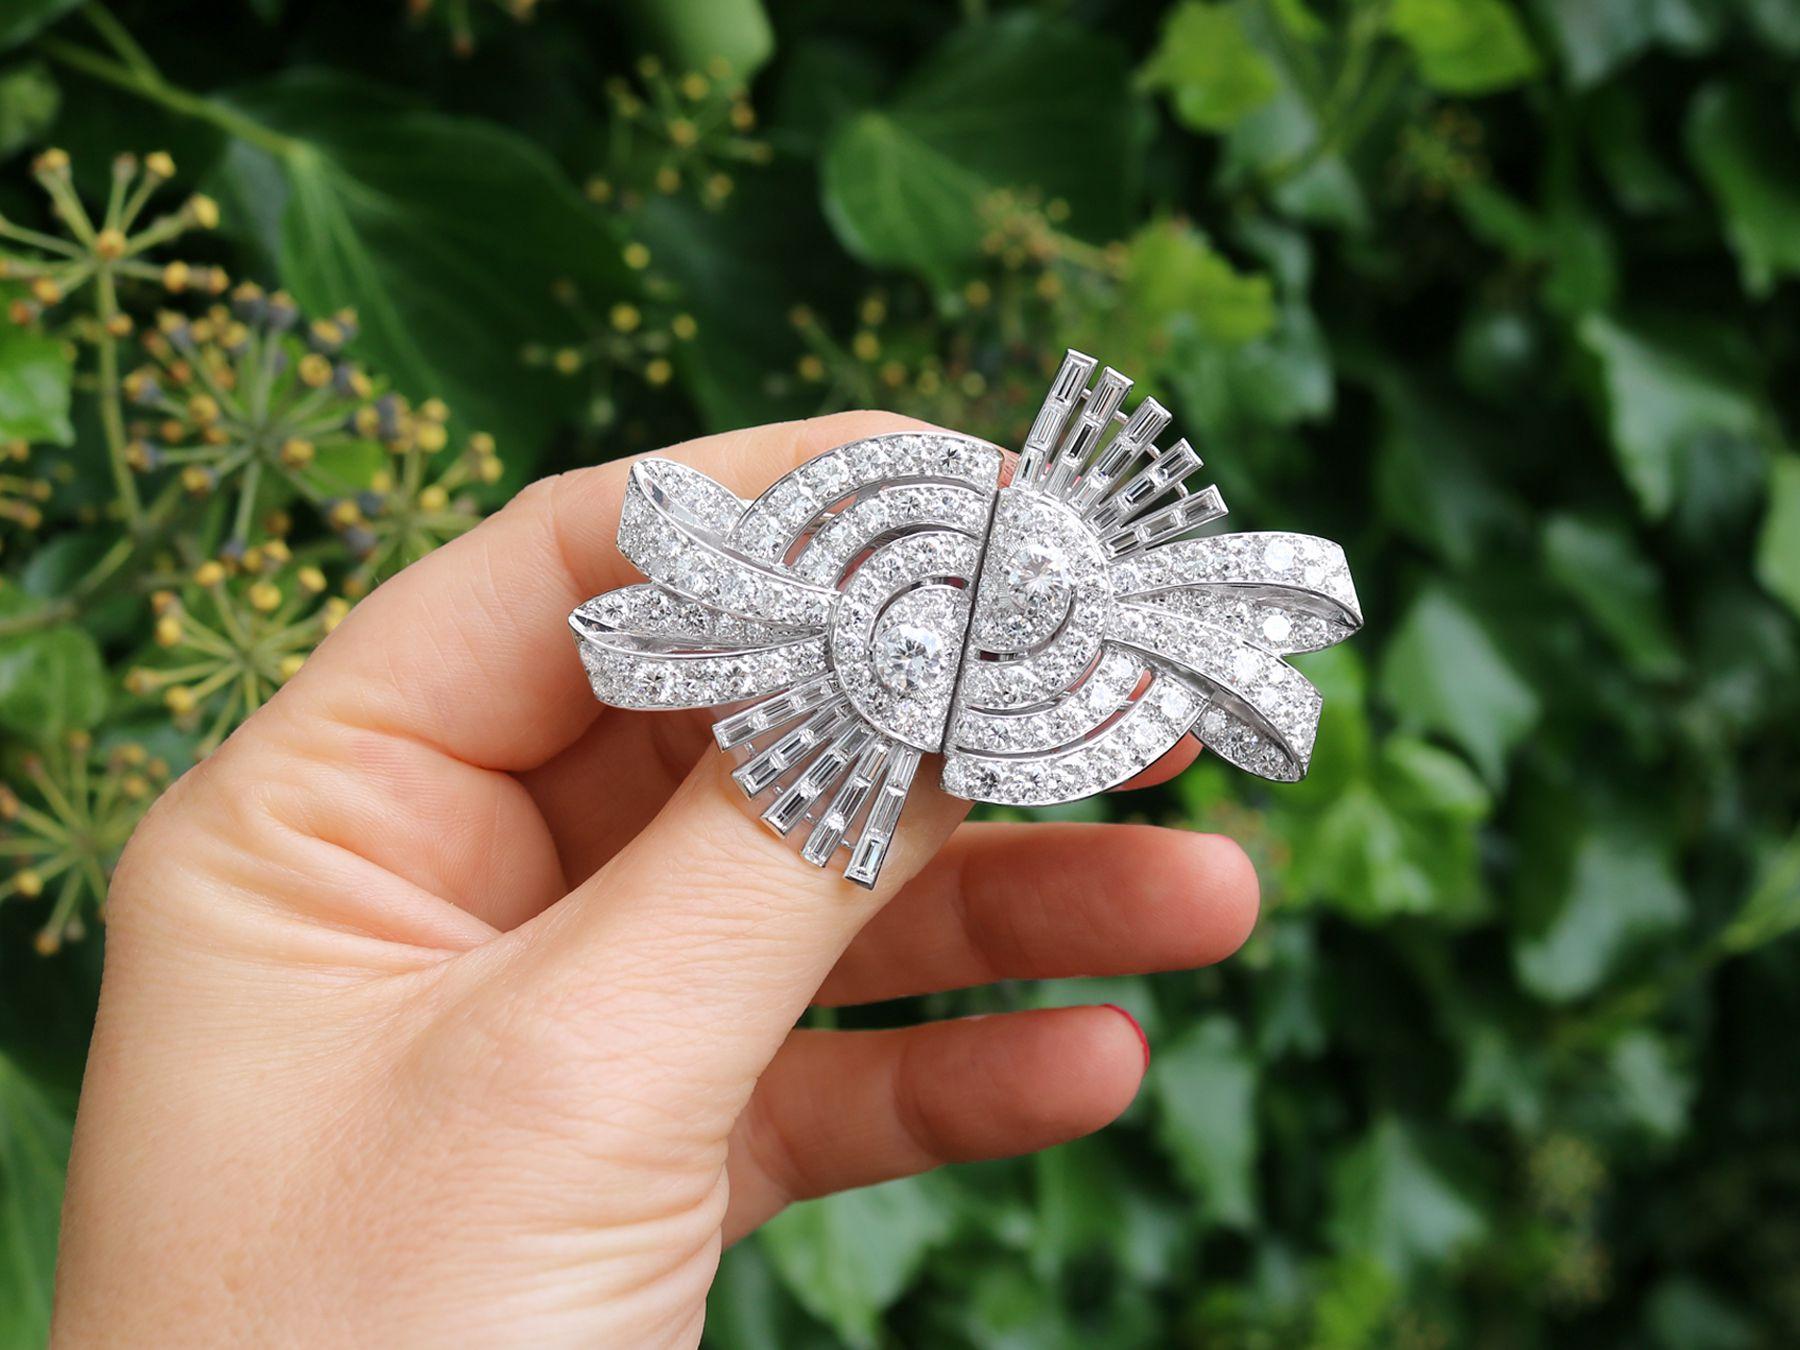 A magnificent, fine and impressive antique 13.22 carat diamond and platinum Art Deco double clip duette brooch; part of our diverse antique jewelry and estate jewelry collections.

This magnificent antique 1930s Art Deco brooch has been crafted in